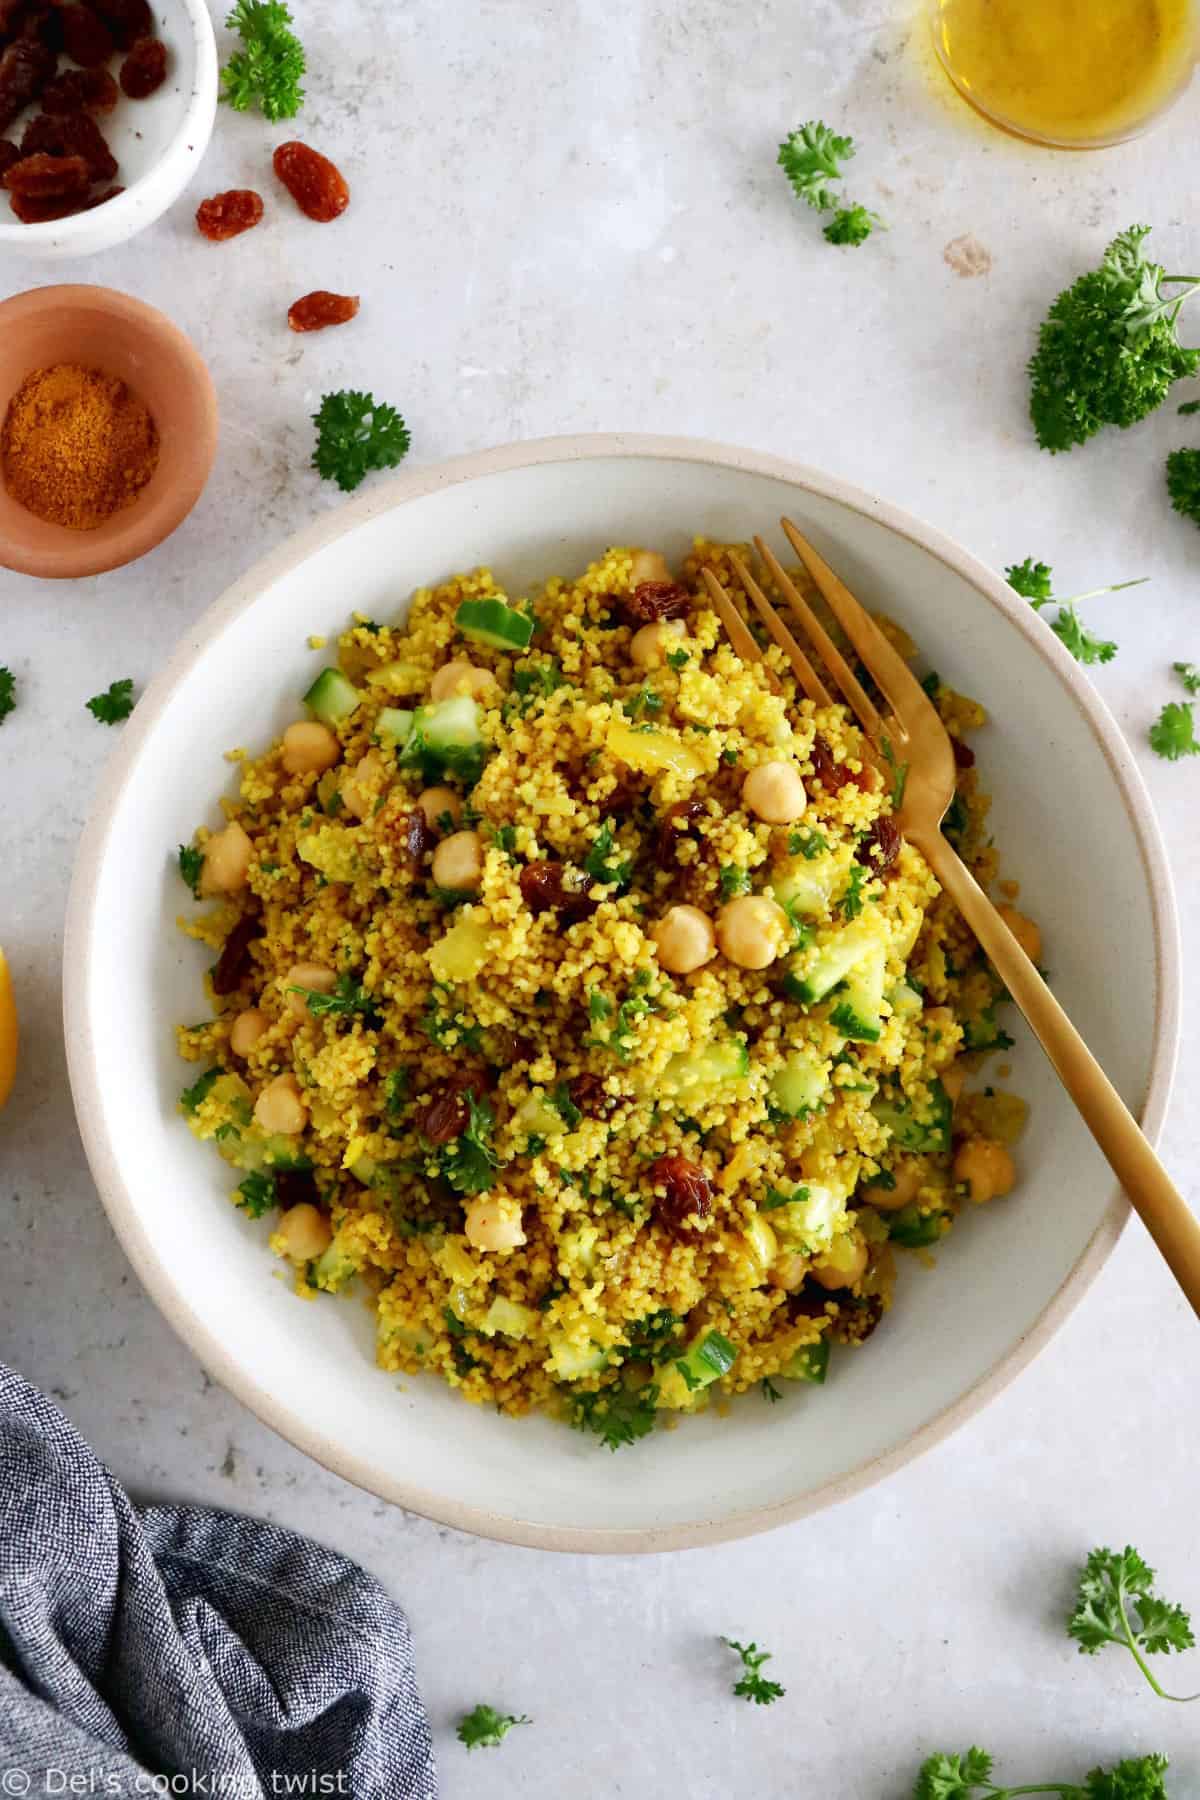 Moroccan-Inspired Chickpea Couscous Salad - Del's cooking twist